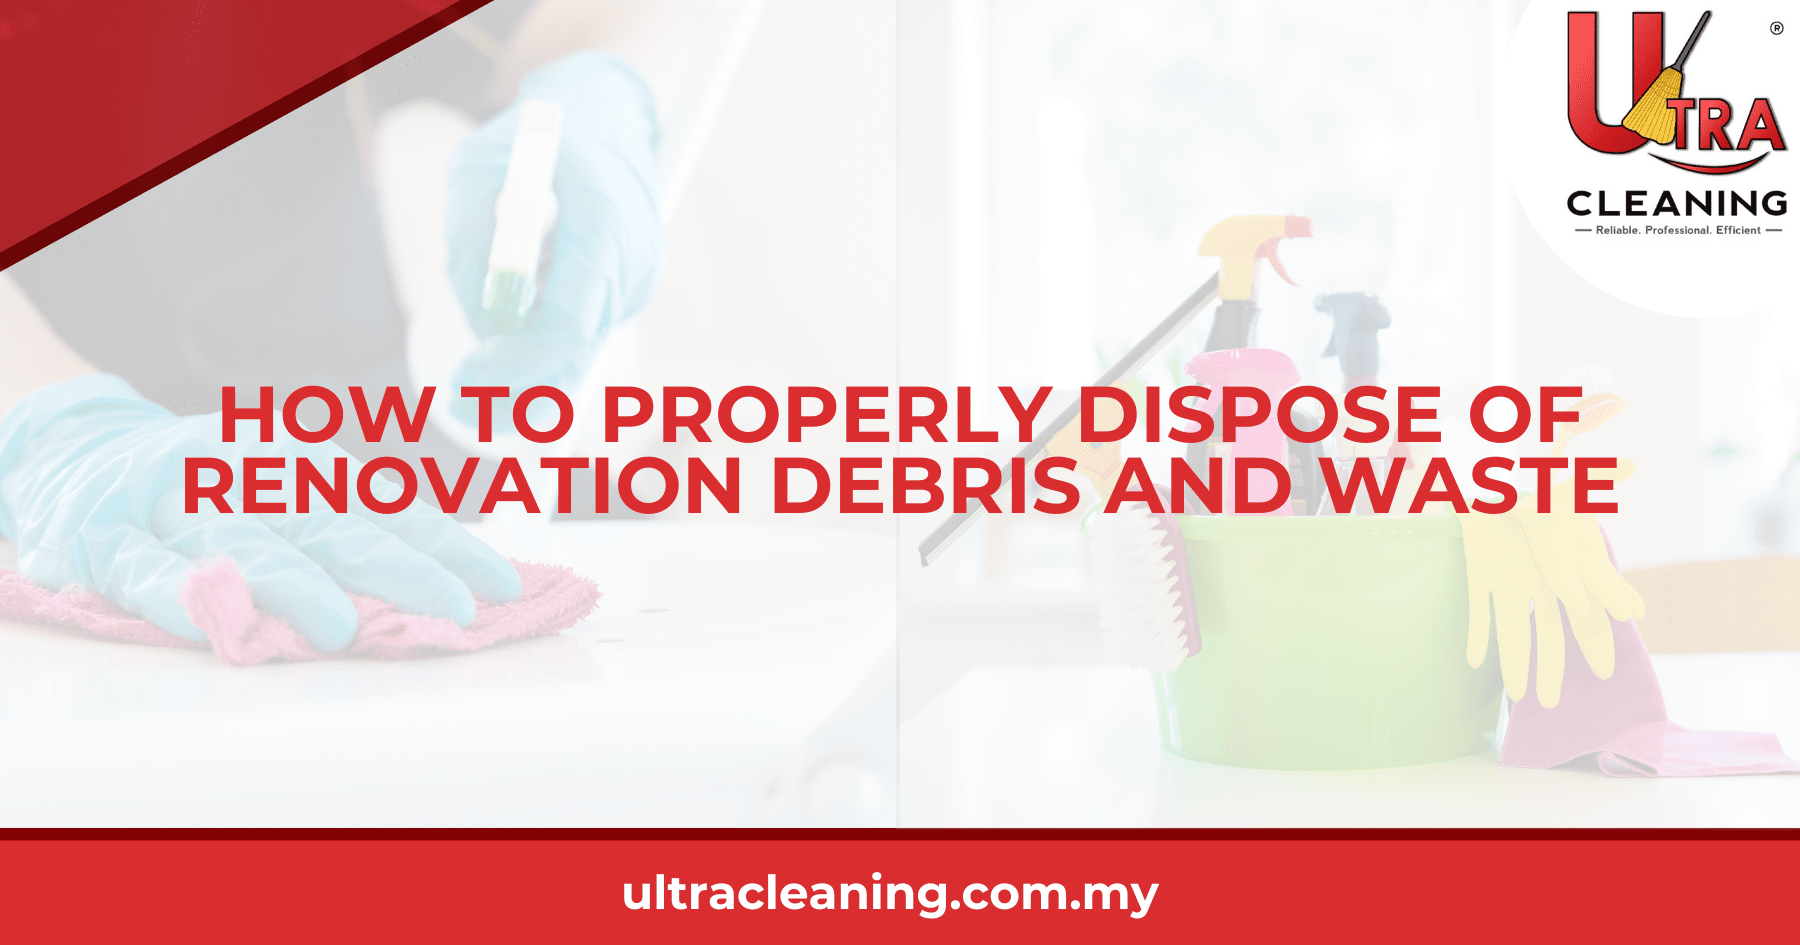 How to Properly Dispose of Renovation Debris and Waste